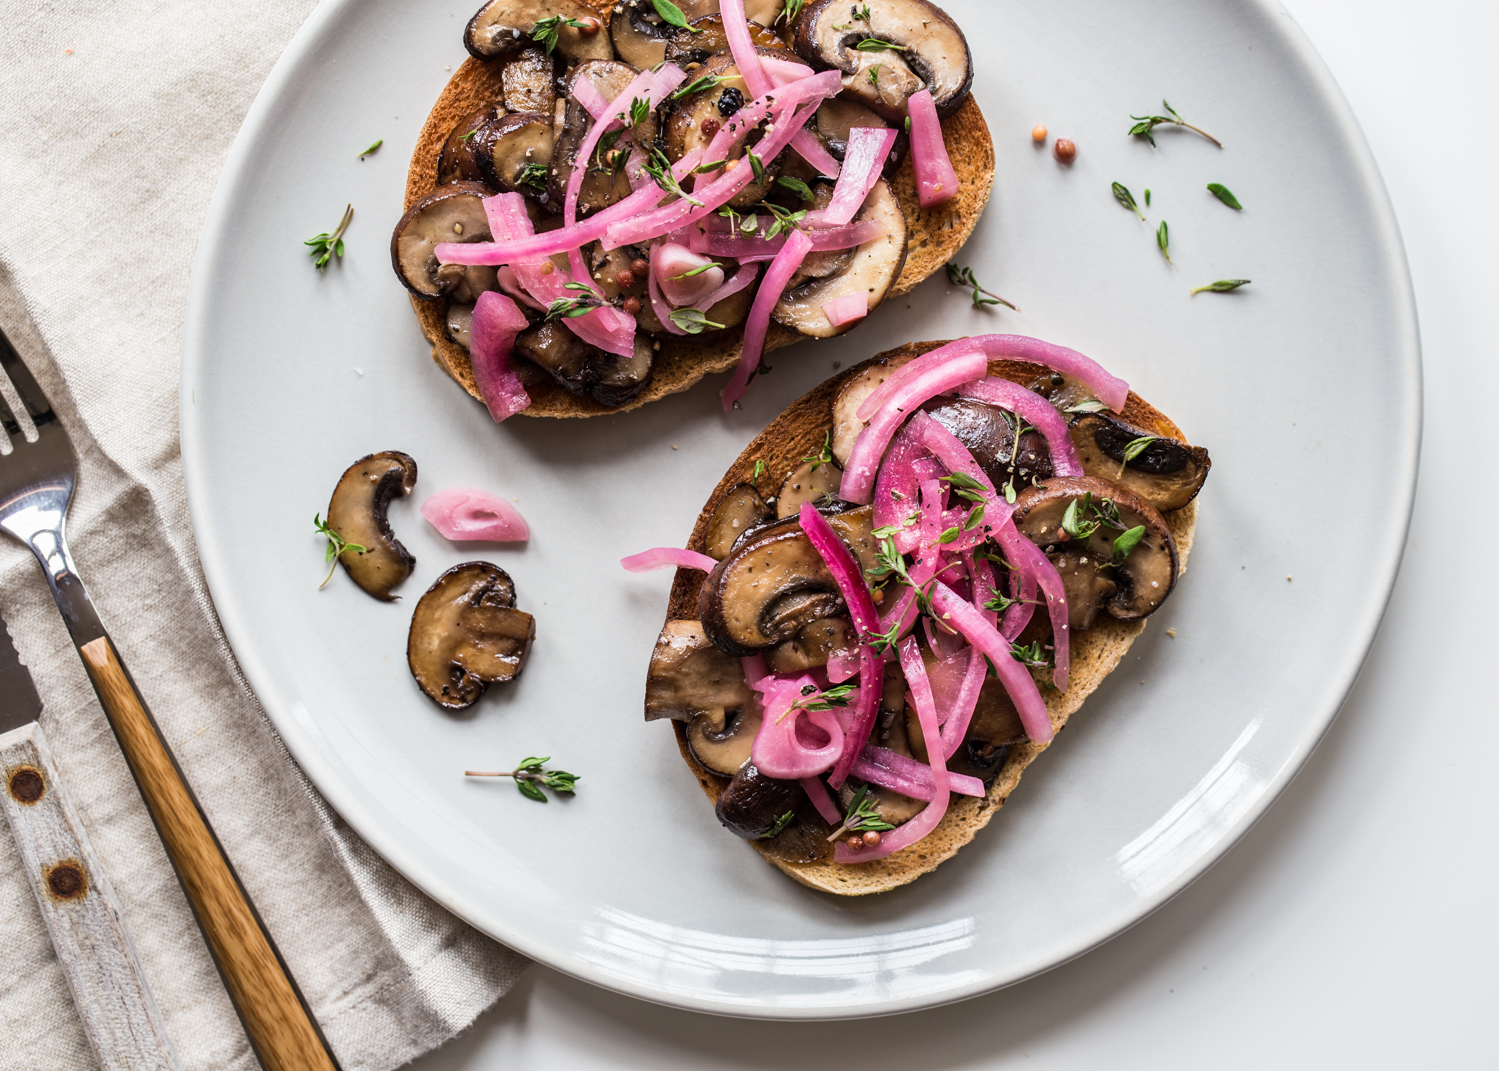 Move over avocado toast, Mushroom Toast with pickled onions is in town